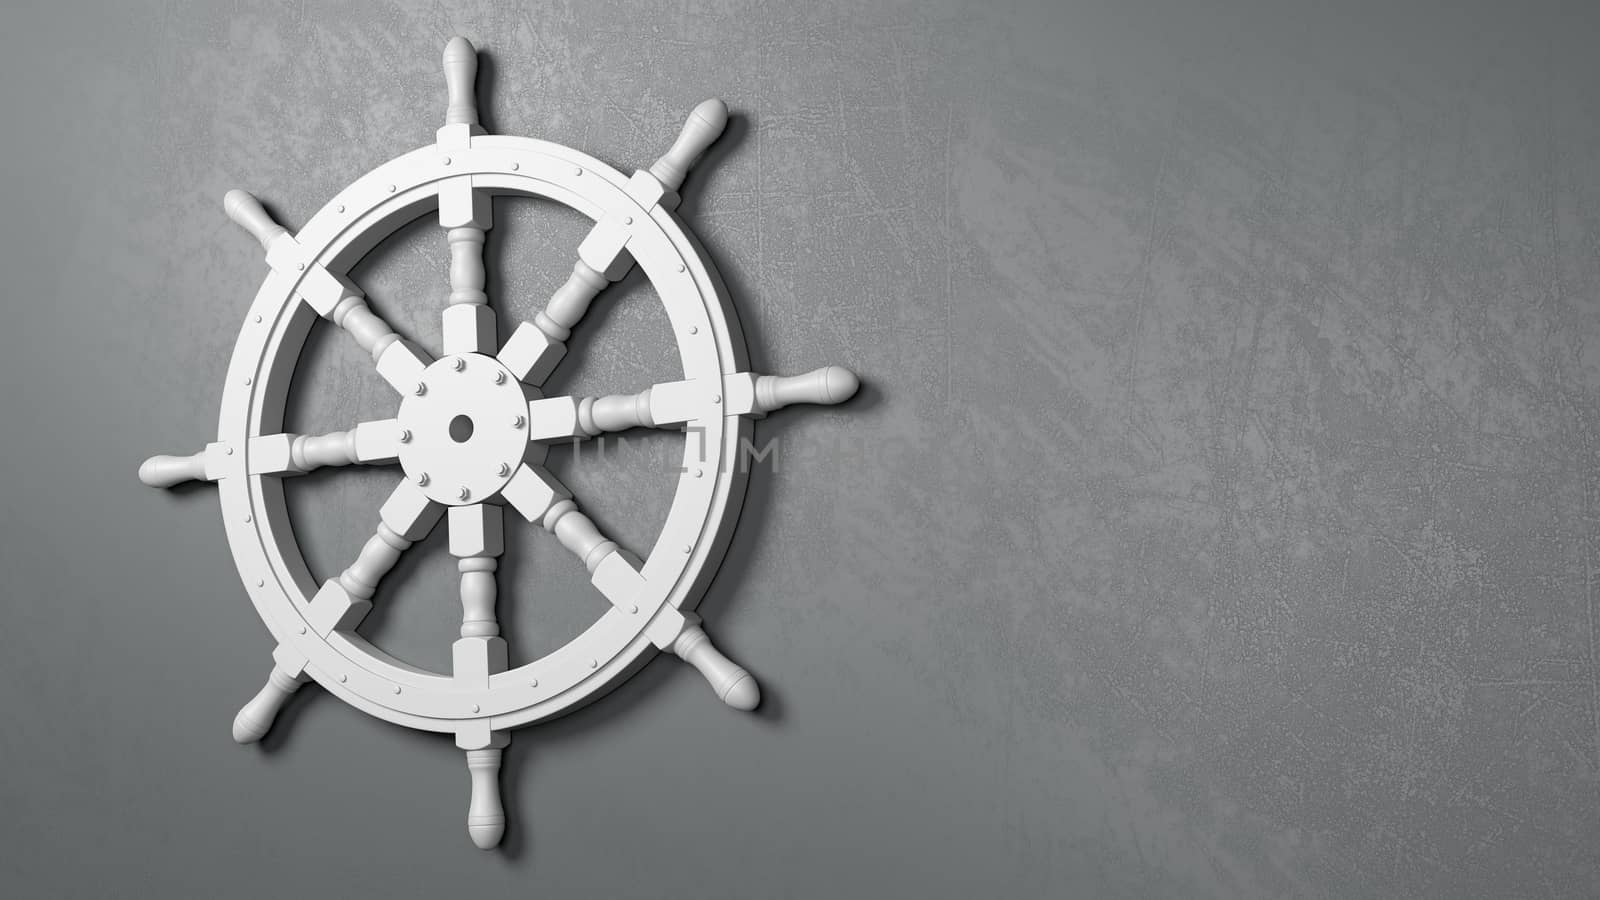 White Wooden Boat Rudder Wheel Against a Dark Gray Plastered Wall with Copy Space 3D Illustration